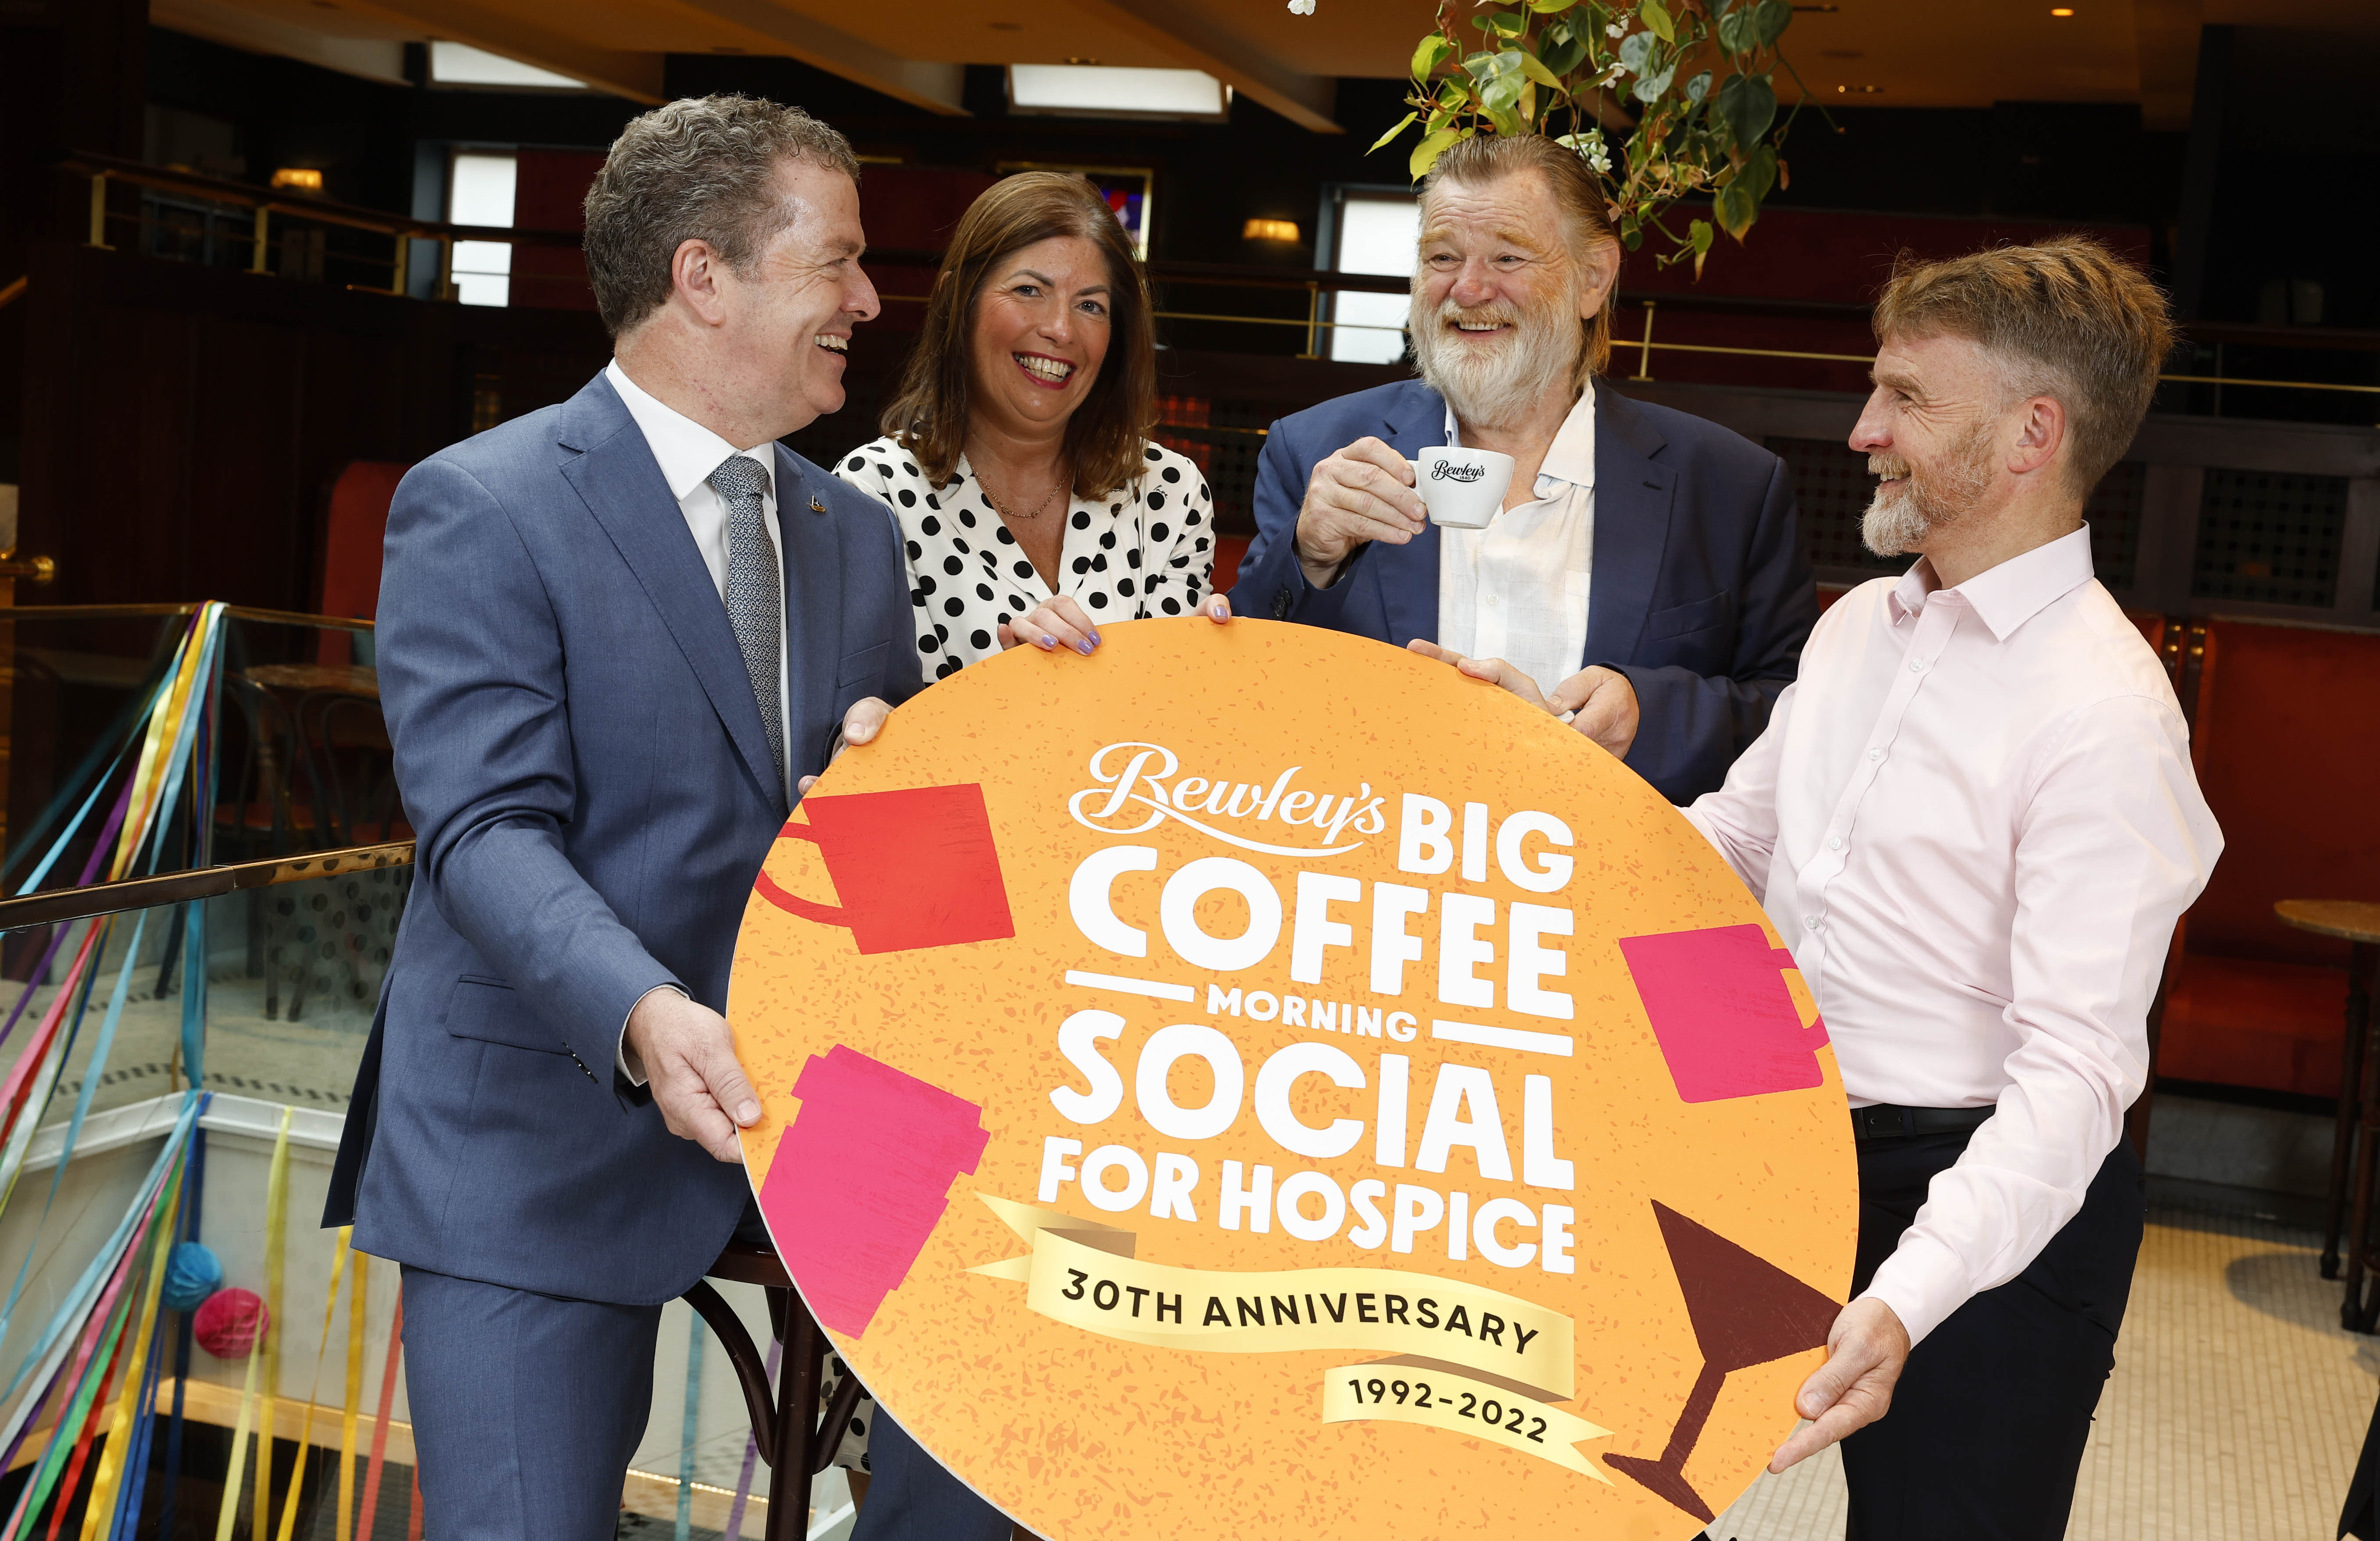 From left, Fintan Fagan, CEO at St Francis Hospice, Audrey Houlihan, chairwoman of Together For Hospice and CEO at Our Lady’s Hospice & Care Services, actor Brendan Gleeson and Col Campbell of Bewley’s pictured at the launch of Bewley’s Big Coffee Morning Social for Hospice (Conor McCabe Photography/PA)